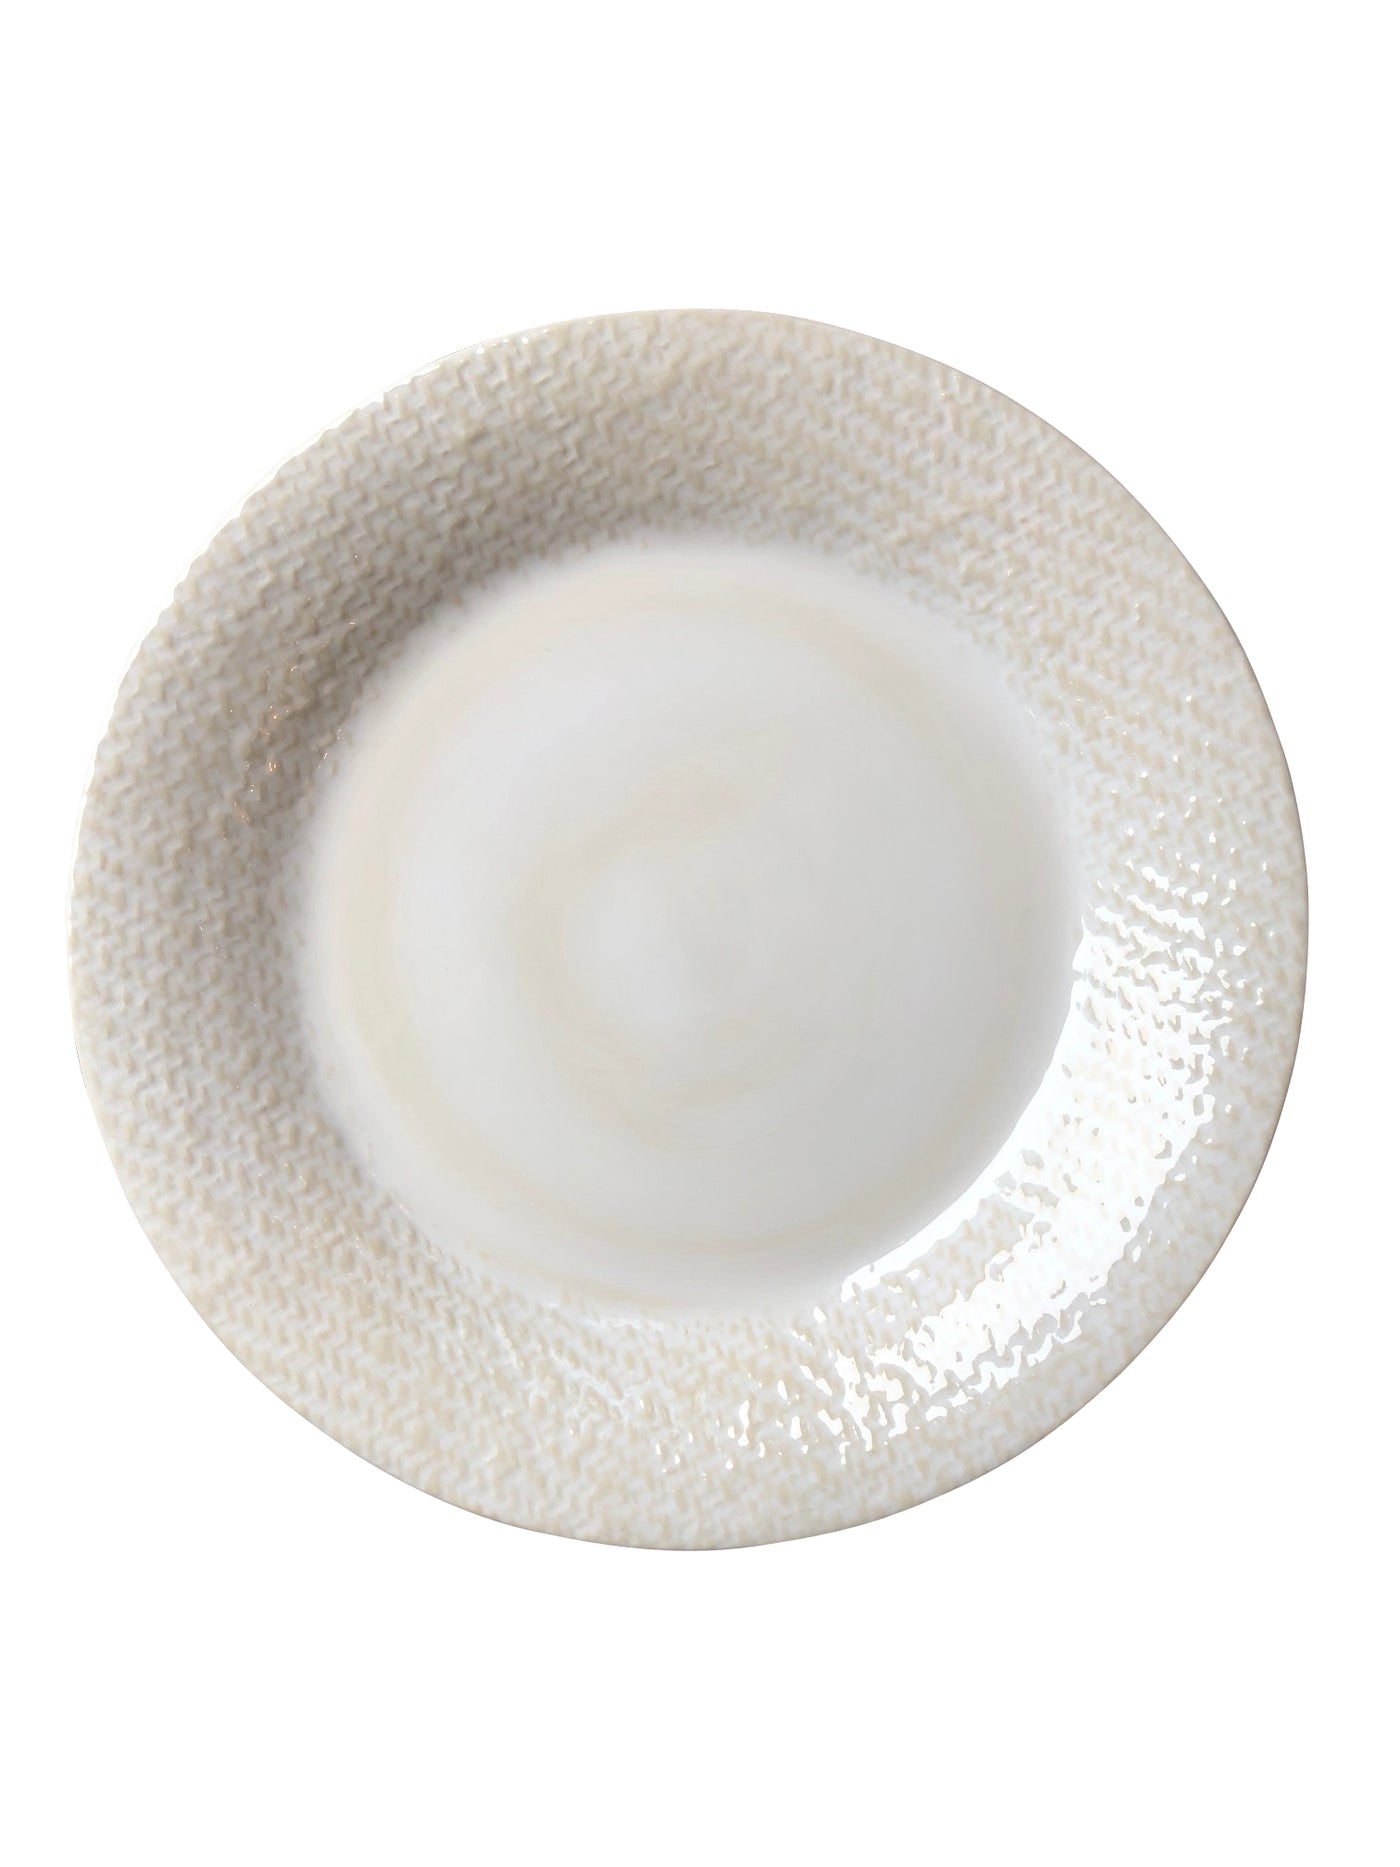 Cream-Glazed　at　Newport　And　Texture　Dinnerware　with　Newport,　Located　Linen　$115.00　in　Lamp　Shade　RI